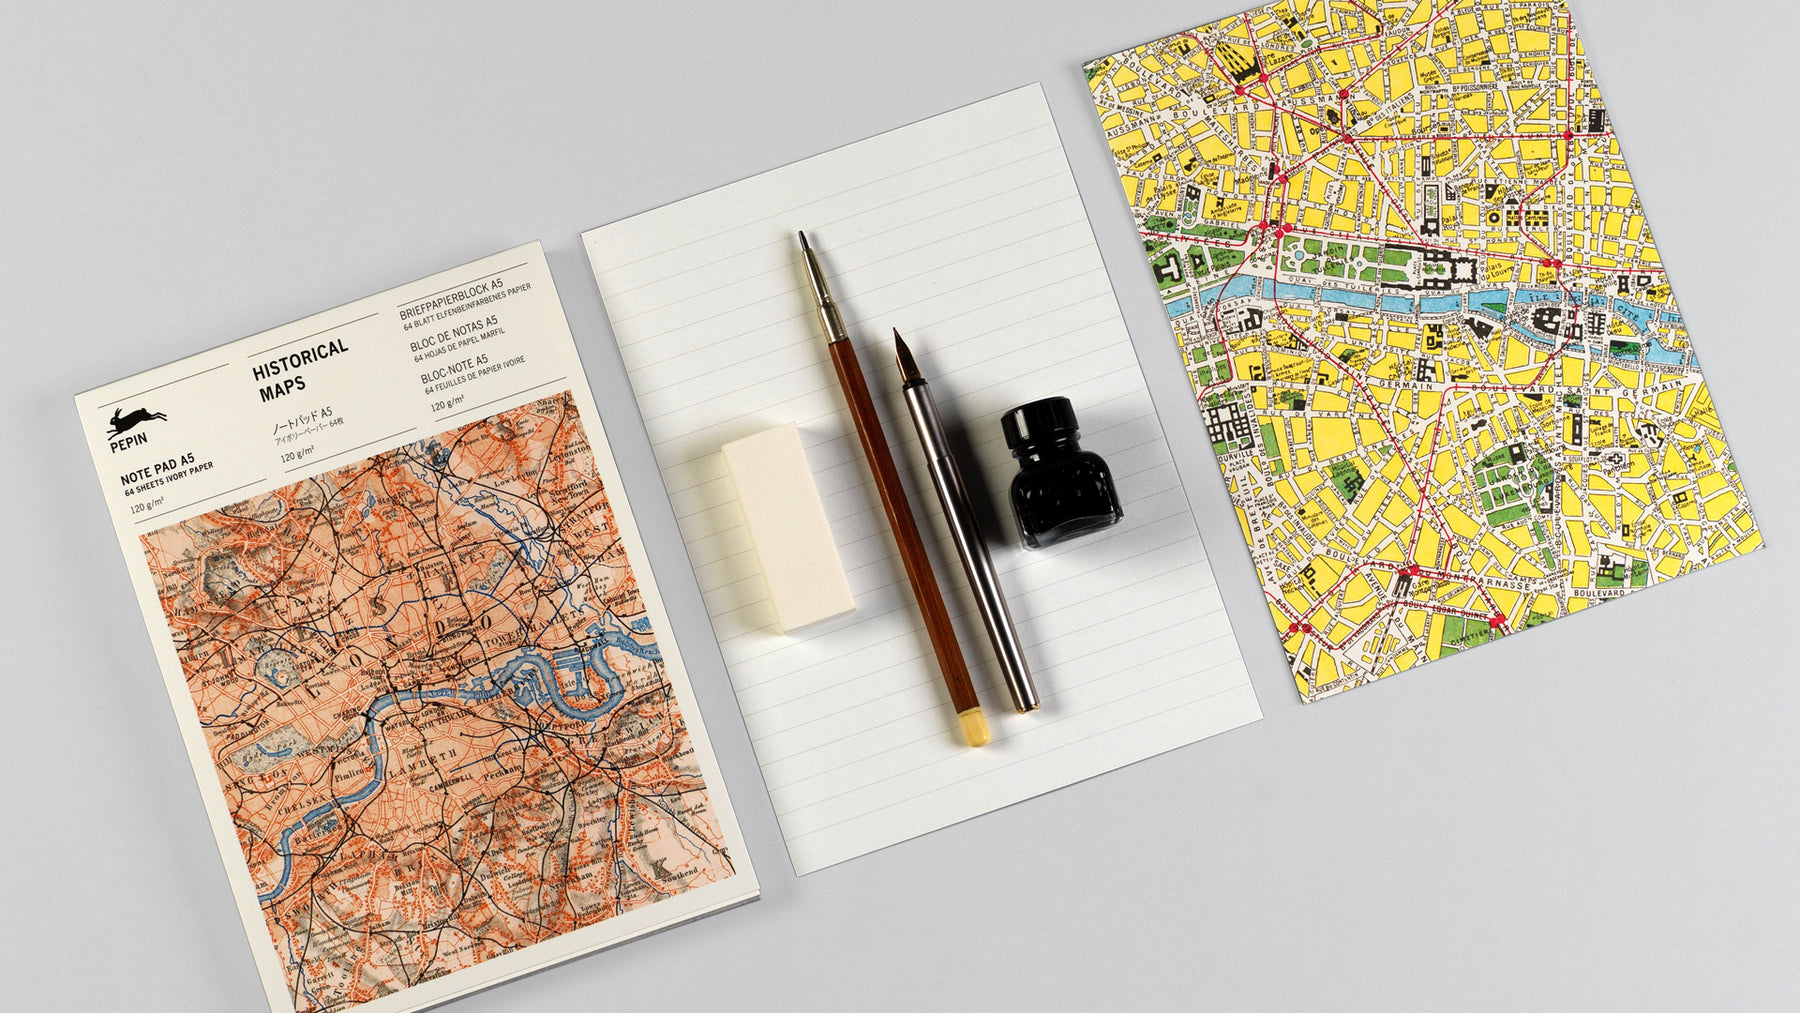 Pepin Notepad A5 - Historical Maps